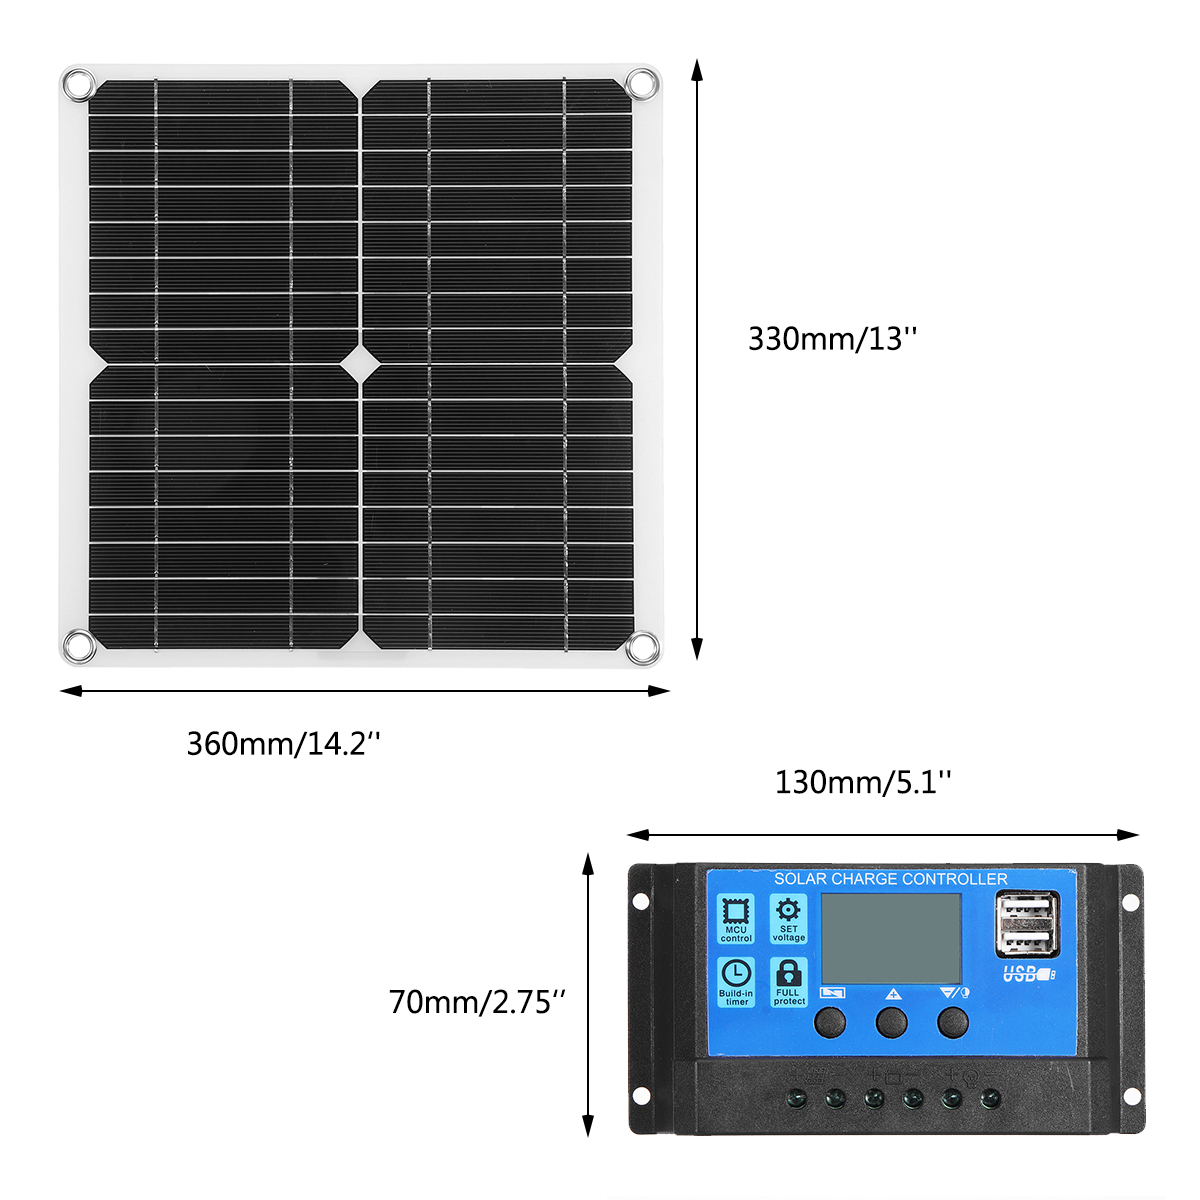 40W-Portable-Solar-Panel-Kit-Battery-Charger-Controller-Waterproof-For-Camping-Traveling-1830191-8